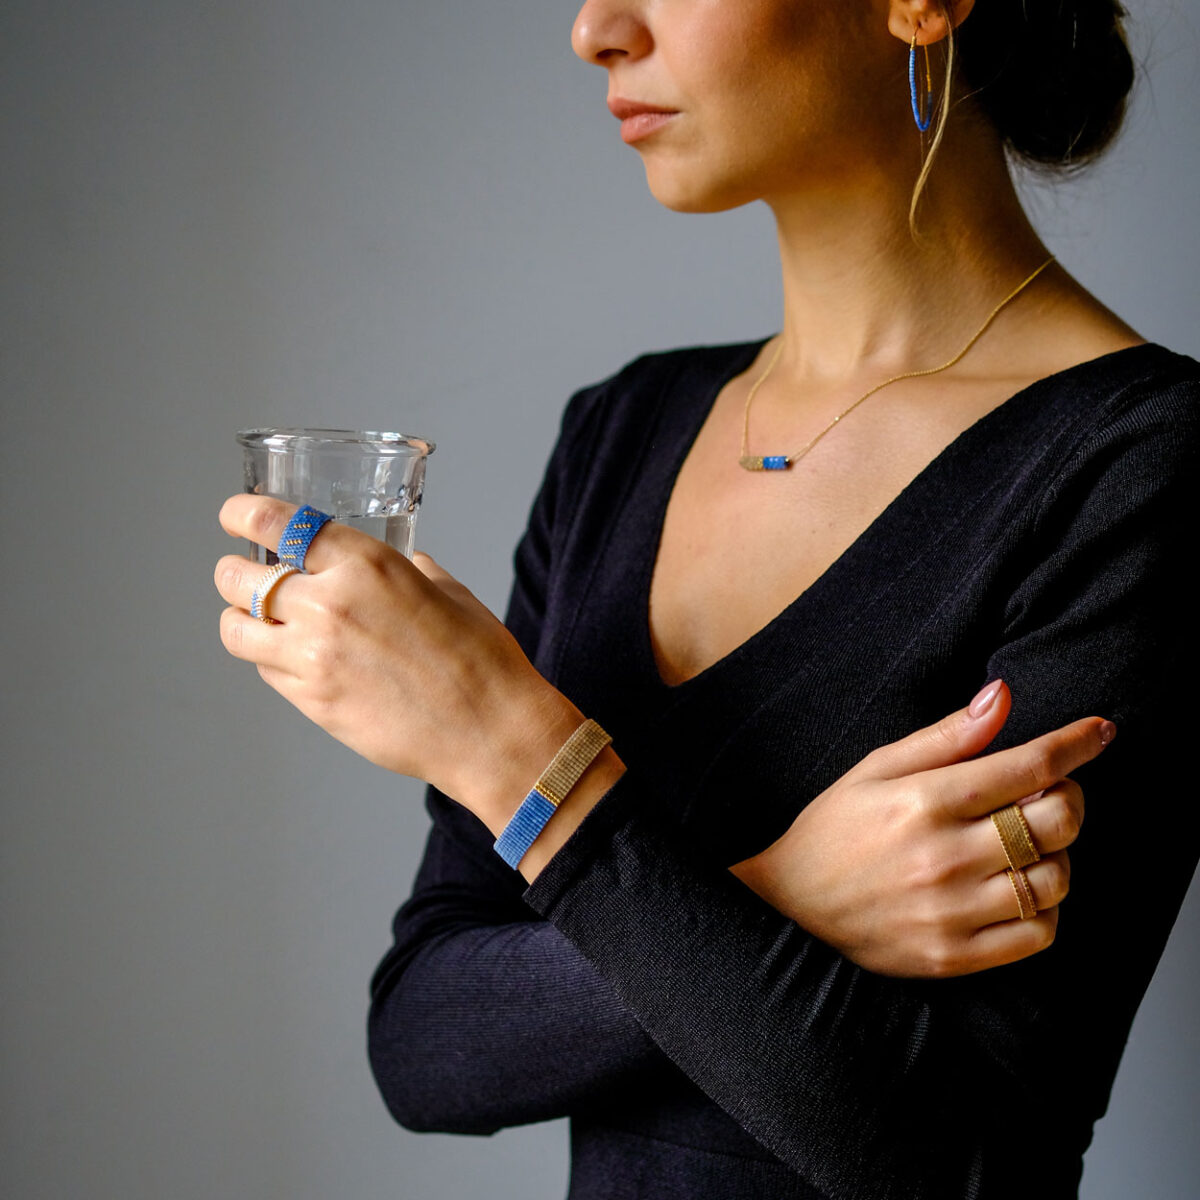 Woman holding a glass of water wearing elegant jewelry and a black dress.